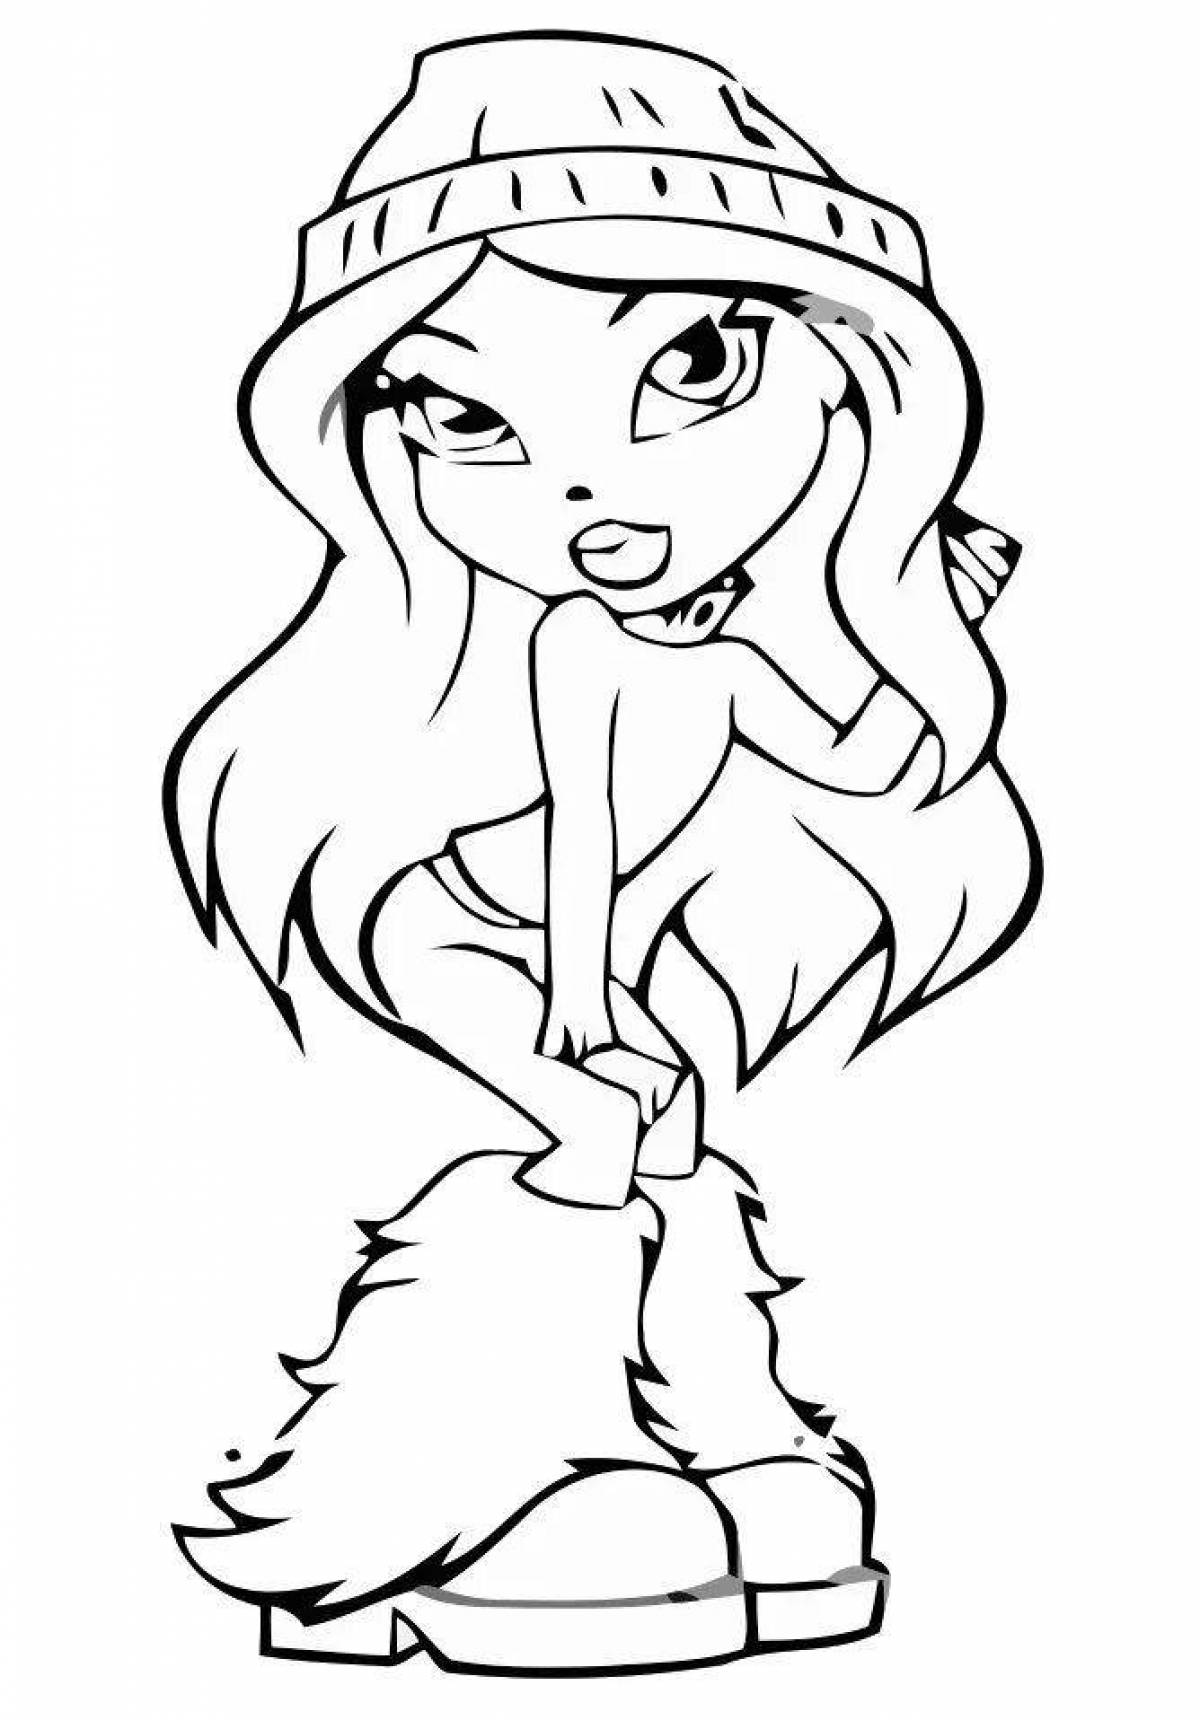 Amazing coloring pages for girls bro